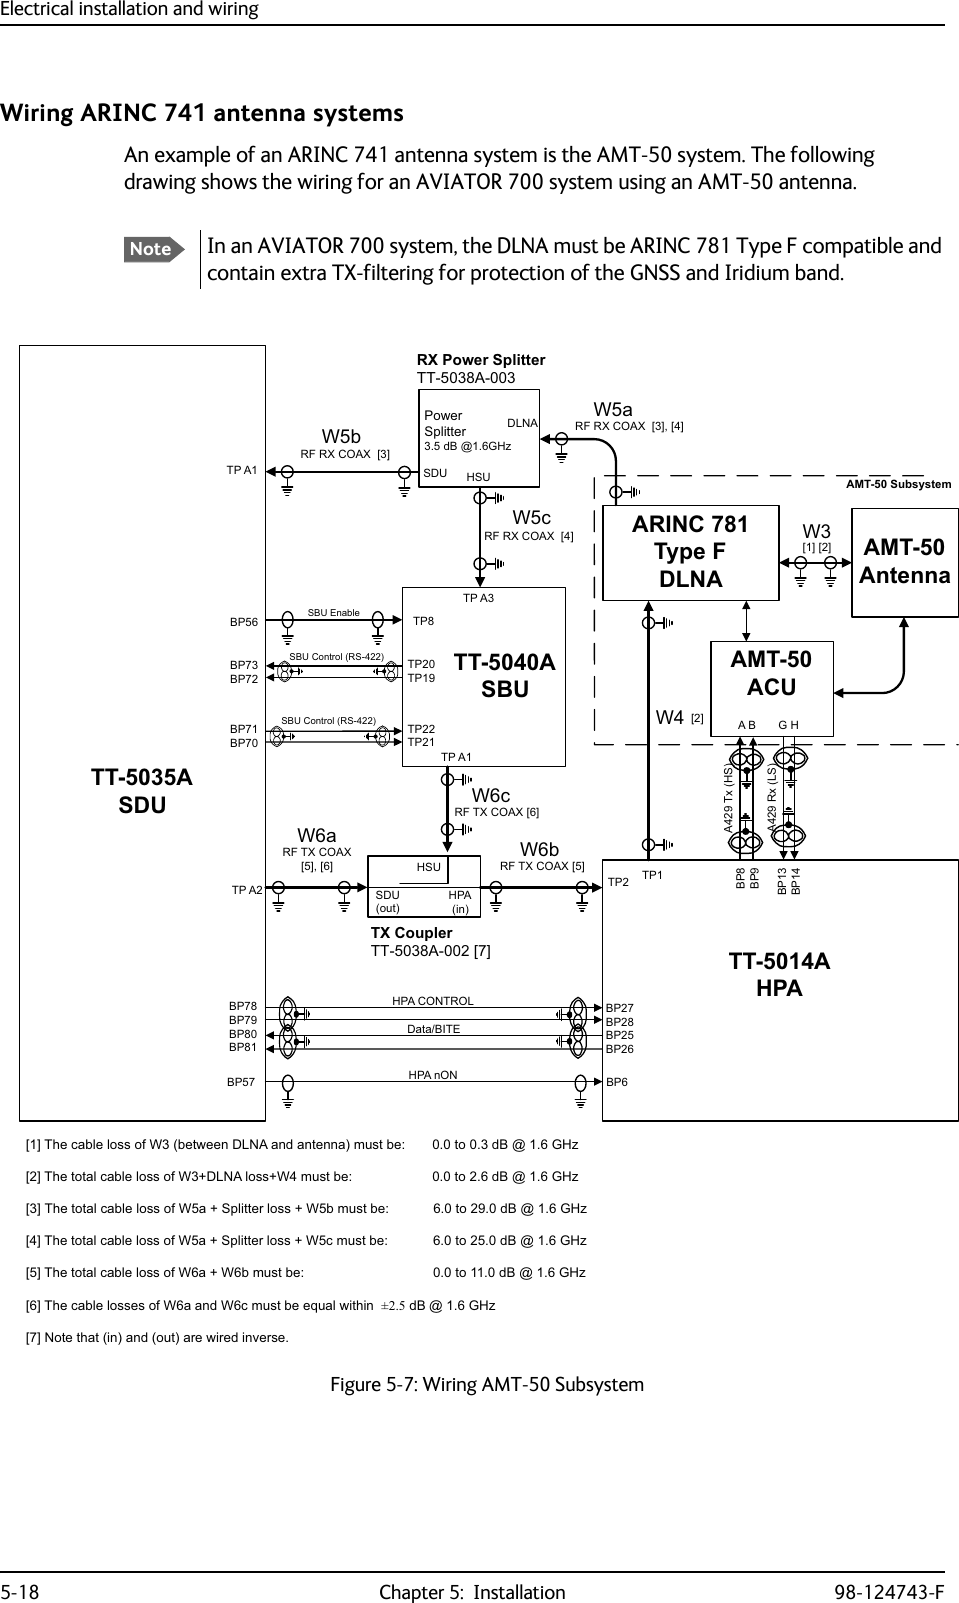 Electrical installation and wiring5-18 Chapter 5:  Installation 98-124743-FWiring ARINC 741 antenna systemsAn example of an ARINC 741 antenna system is the AMT-50 system. The following drawing shows the wiring for an AVIATOR 700 system using an AMT-50 antenna.NoteIn an AVIATOR 700 system, the DLNA must be ARINC 781 Type F compatible and contain extra TX-filtering for protection of the GNSS and Iridium band.Figure 5-7: Wiring AMT-50 Subsystem7;&amp;RXSOHU77$&gt;@77$6&apos;8$07$QWHQQD$5,1&amp;7\SH)&apos;/1$3RZHU6SOLWWHUG%#*+]+686&apos;8&apos;/1$5;3RZHU6SOLWWHU77$77$6%86%8&amp;RQWURO56%3%3%3%3%373737373736%8&amp;RQWURO566%8(QDEOH73$73$6&apos;8RXW+3$LQ+687377$+3$73%3%3%3%3+3$Q21%3 %3%3%3%3%3+3$&amp;21752/&apos;DWD%,7(73$73$5)5;&amp;2$;&gt;@&gt;@5)5;&amp;2$;&gt;@: &gt;@5)7;&amp;2$;&gt;@5)7;&amp;2$;&gt;@&gt;@ 5)7;&amp;2$;&gt;@5)5;&amp;2$;&gt;@$07$&amp;8$%*+:&gt;@&gt;@%3%3%3%3$7[+6$5[/6$076XEV\VWHP:D:E:F:F:D :E&gt;@7KHFDEOHORVVRI:EHWZHHQ&apos;/1$DQGDQWHQQDPXVWEH WRG%#*+]&gt;@7KHWRWDOFDEOHORVVRI:&apos;/1$ORVV:PXVWEH WRG%#*+]&gt;@7KHWRWDOFDEOHORVVRI:D6SOLWWHUORVV:EPXVWEH WRG%#*+]&gt;@7KHWRWDOFDEOHORVVRI:D6SOLWWHUORVV:FPXVWEH WRG%#*+]&gt;@7KHWRWDOFDEOHORVVRI:D:EPXVWEH WRG%#*+]&gt;@7KHFDEOHORVVHVRI:DDQG:FPXVWEHHTXDOZLWKLQG%#*+]&gt;@1RWHWKDWLQDQGRXWDUHZLUHGLQYHUVH